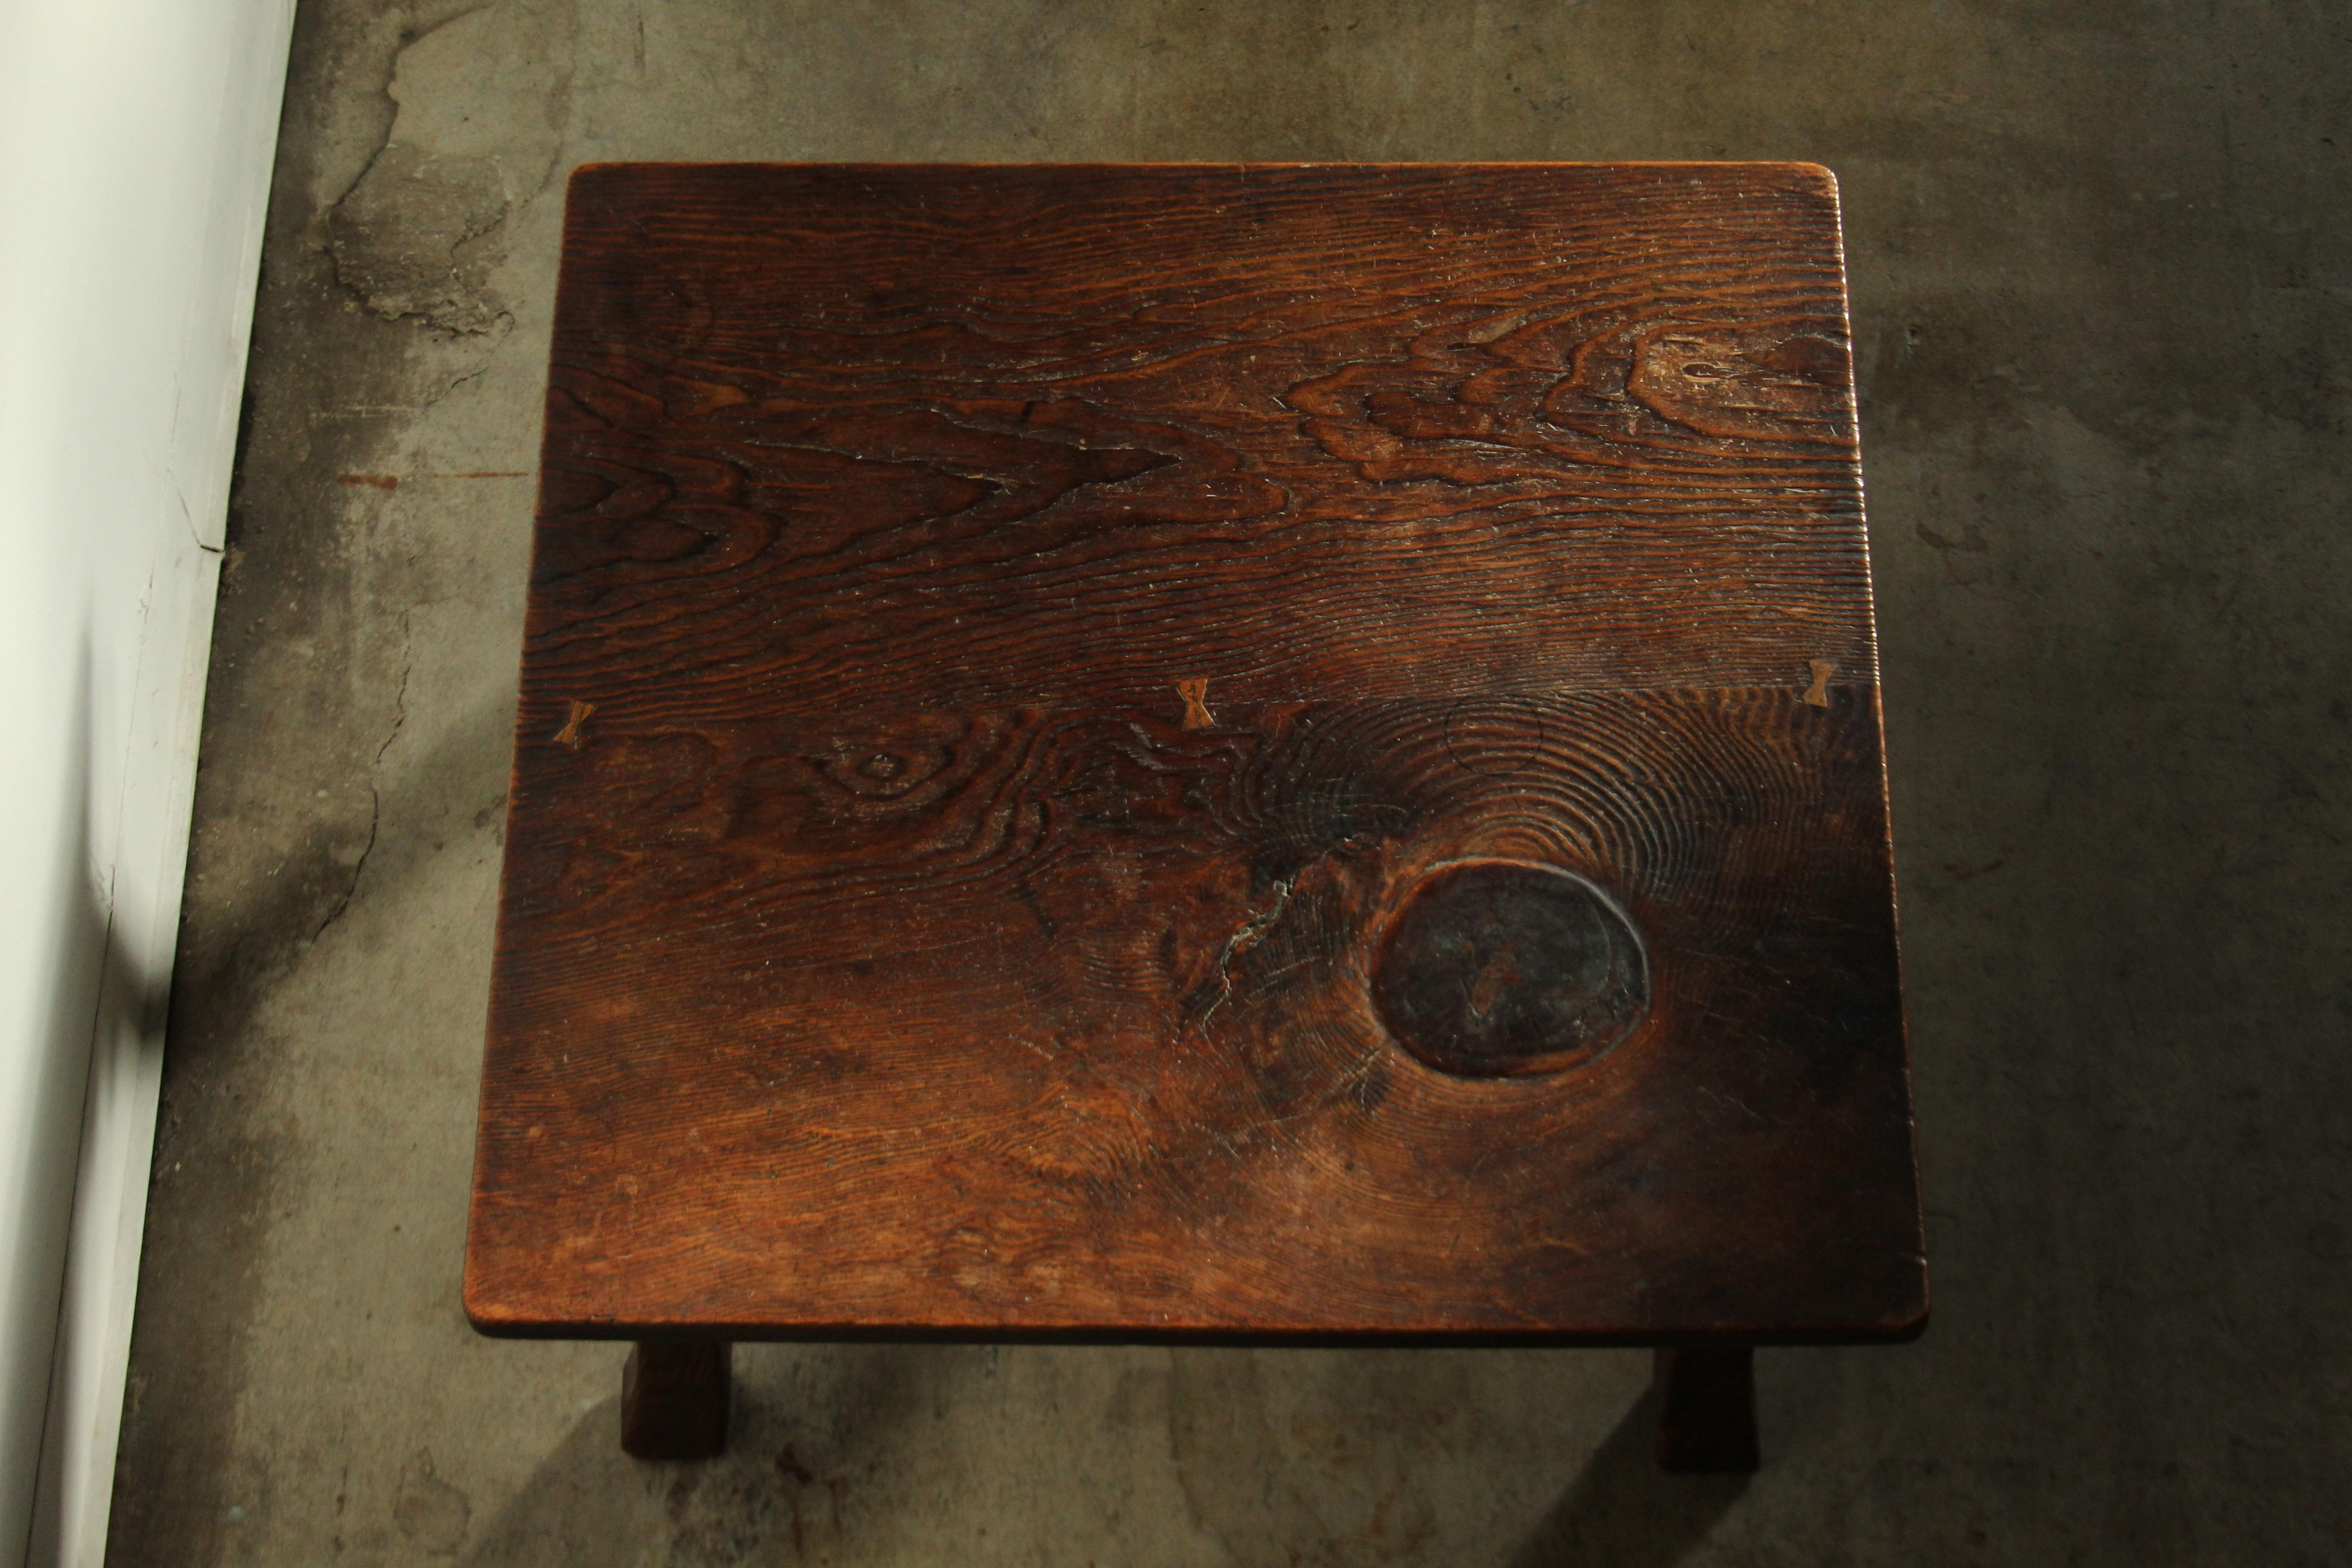 An extraordinary 19th century antique Japanese low table constructed from an incredible and substantial, old growth cedar plank, with 4 out swept legs. This piece was made in Japan, likely in the late 1800s to 1900. 
The table is finished with a